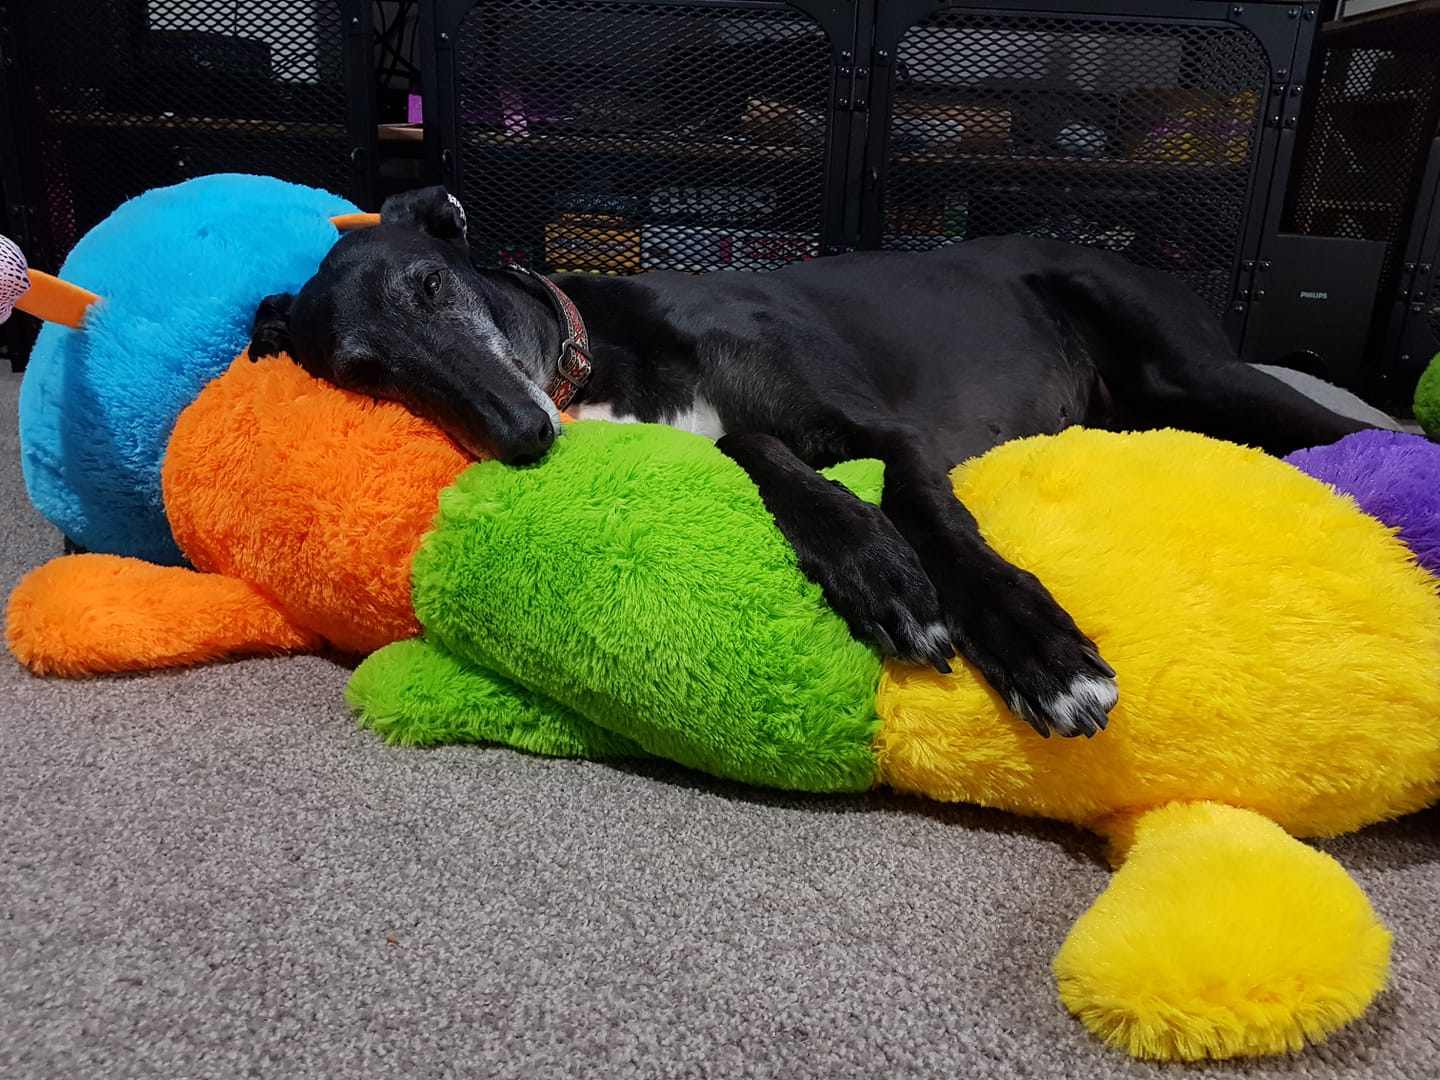 Both Trudy and her Cuddlepillar have found a very happy home.